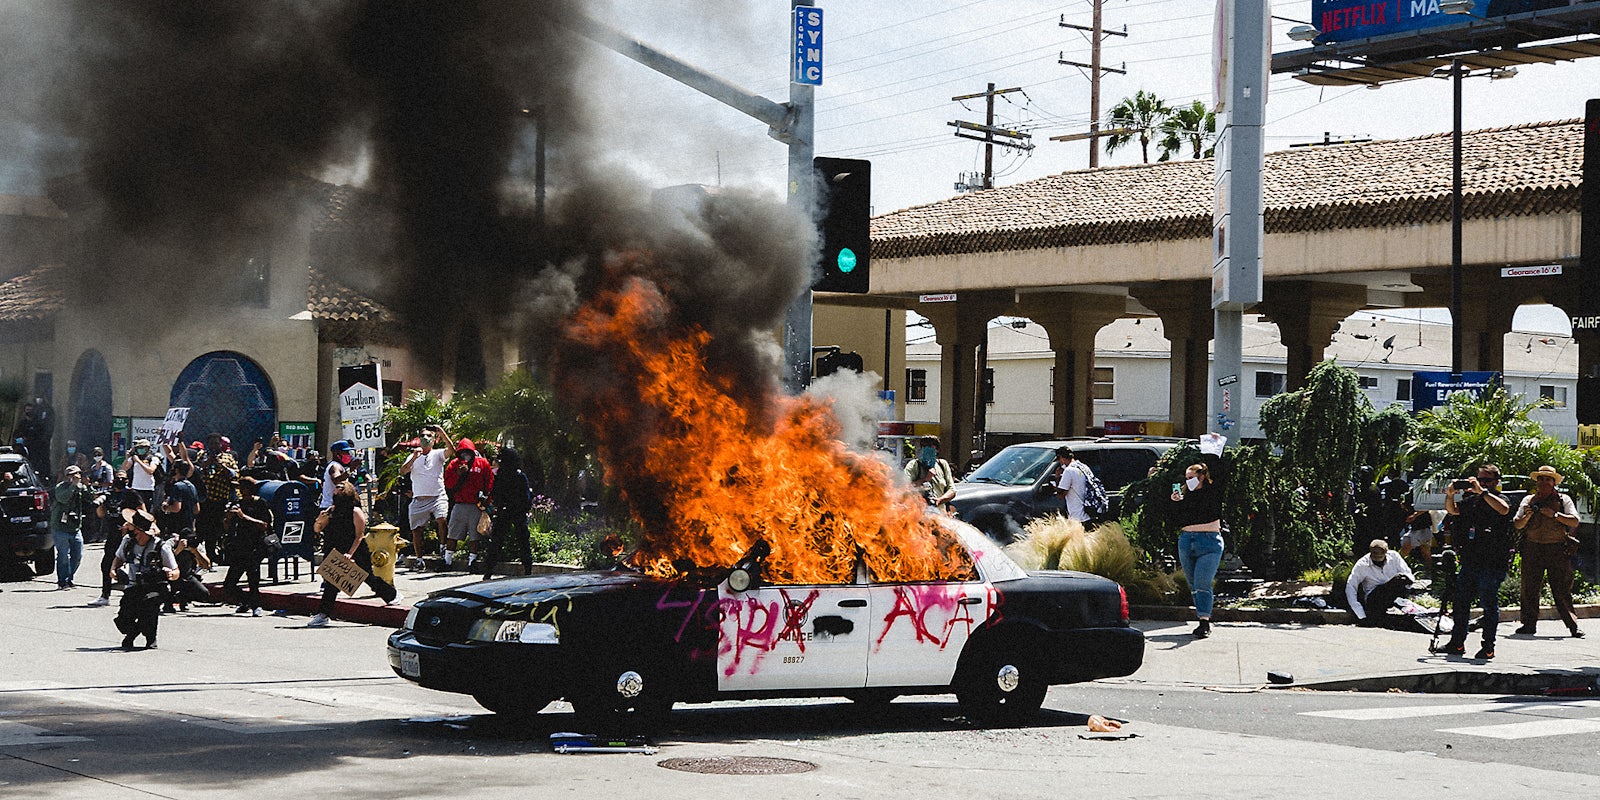 An LAPD car on fire while people watch it burn.